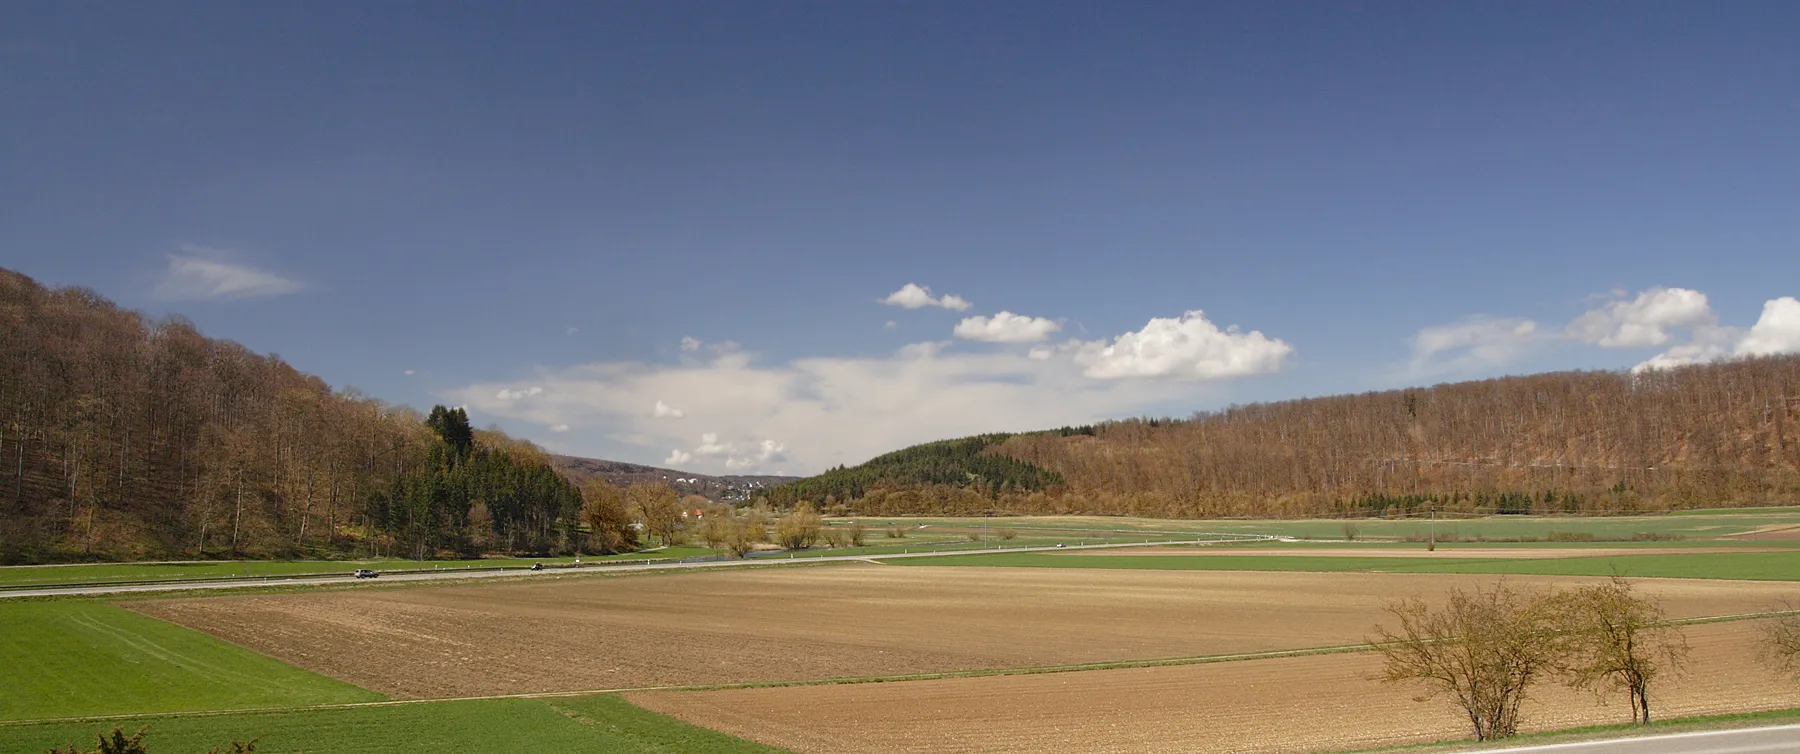 Photo showing: Valley of river Brenz. Todays upper Brenz (hidden beyond the road)  is a poor danubian rivulet. Rivulet and valley beyond it are a strictly protected nature reserve, the visible part of the valley is a protected landscape (Landschaftschutz). The 600m wide valley, ca. 3,5km south of its karst springs (town Königsbronn in the back) cannot be eroded by its contemporary poor rivulet. River Brenz is one of the oldest rivers of Southwest Germany. This is backed by 20 Million years old ”Ochsenberg Schotter”, (river gravel) in a village high above the valley. The catchment area of a pleistocene Brenz reached far beyond the northern border of the Swabian Alb.
The main water devide, now dividing the springs of river Kocher (to the N, river Neckar) and those of river Brenz (to the S, river Danube), occured when the power of water erosion turned to be less than the uplift of the Swabian Alb.